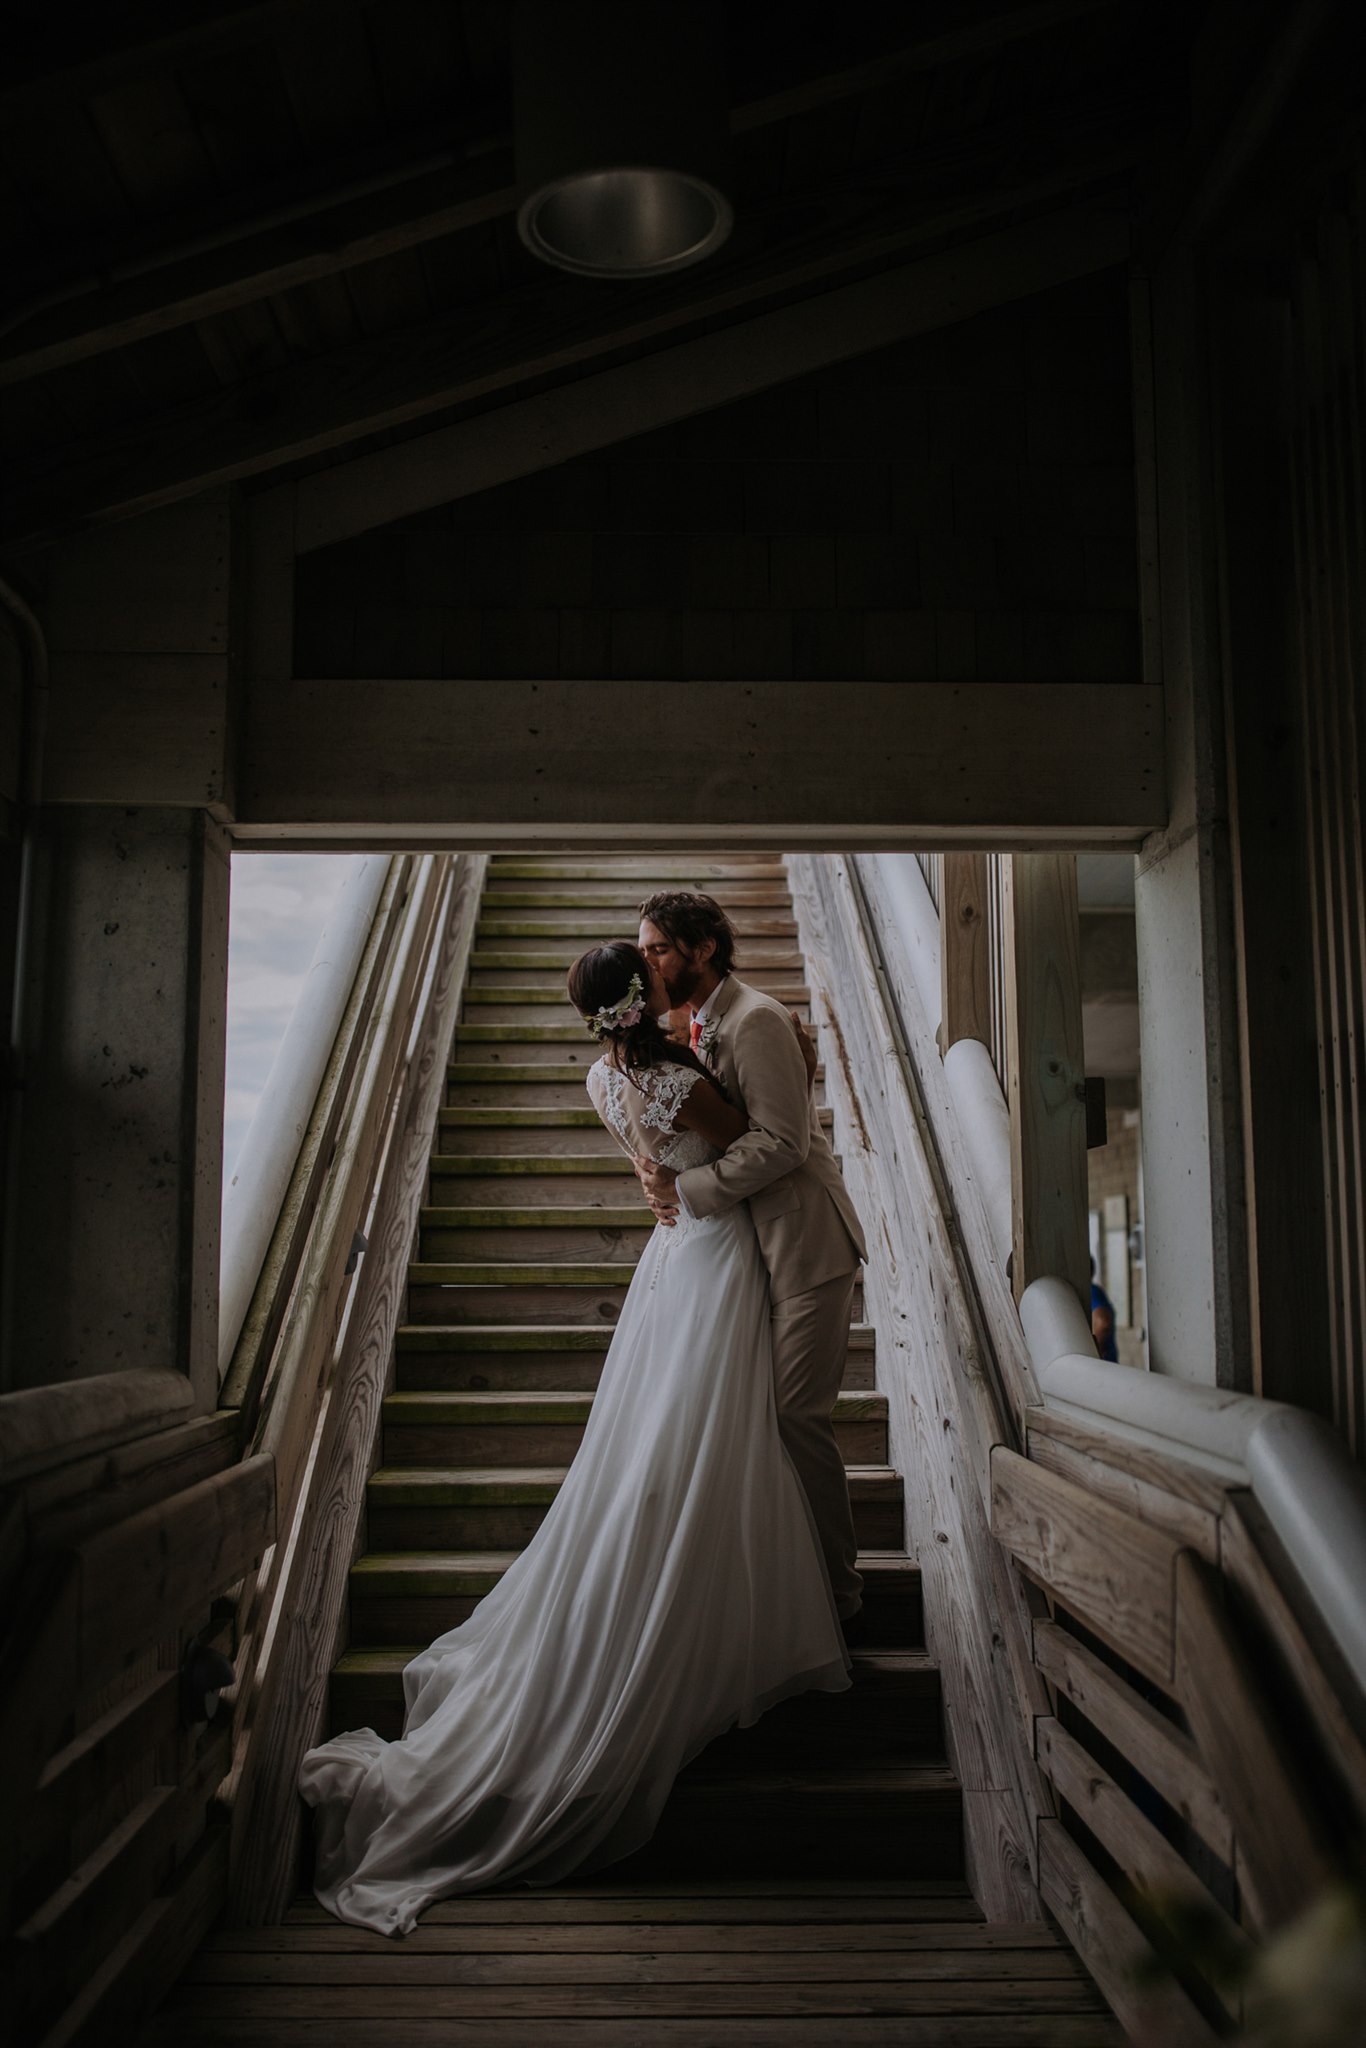 A wedding couple kiss at the bottom of a staircase.